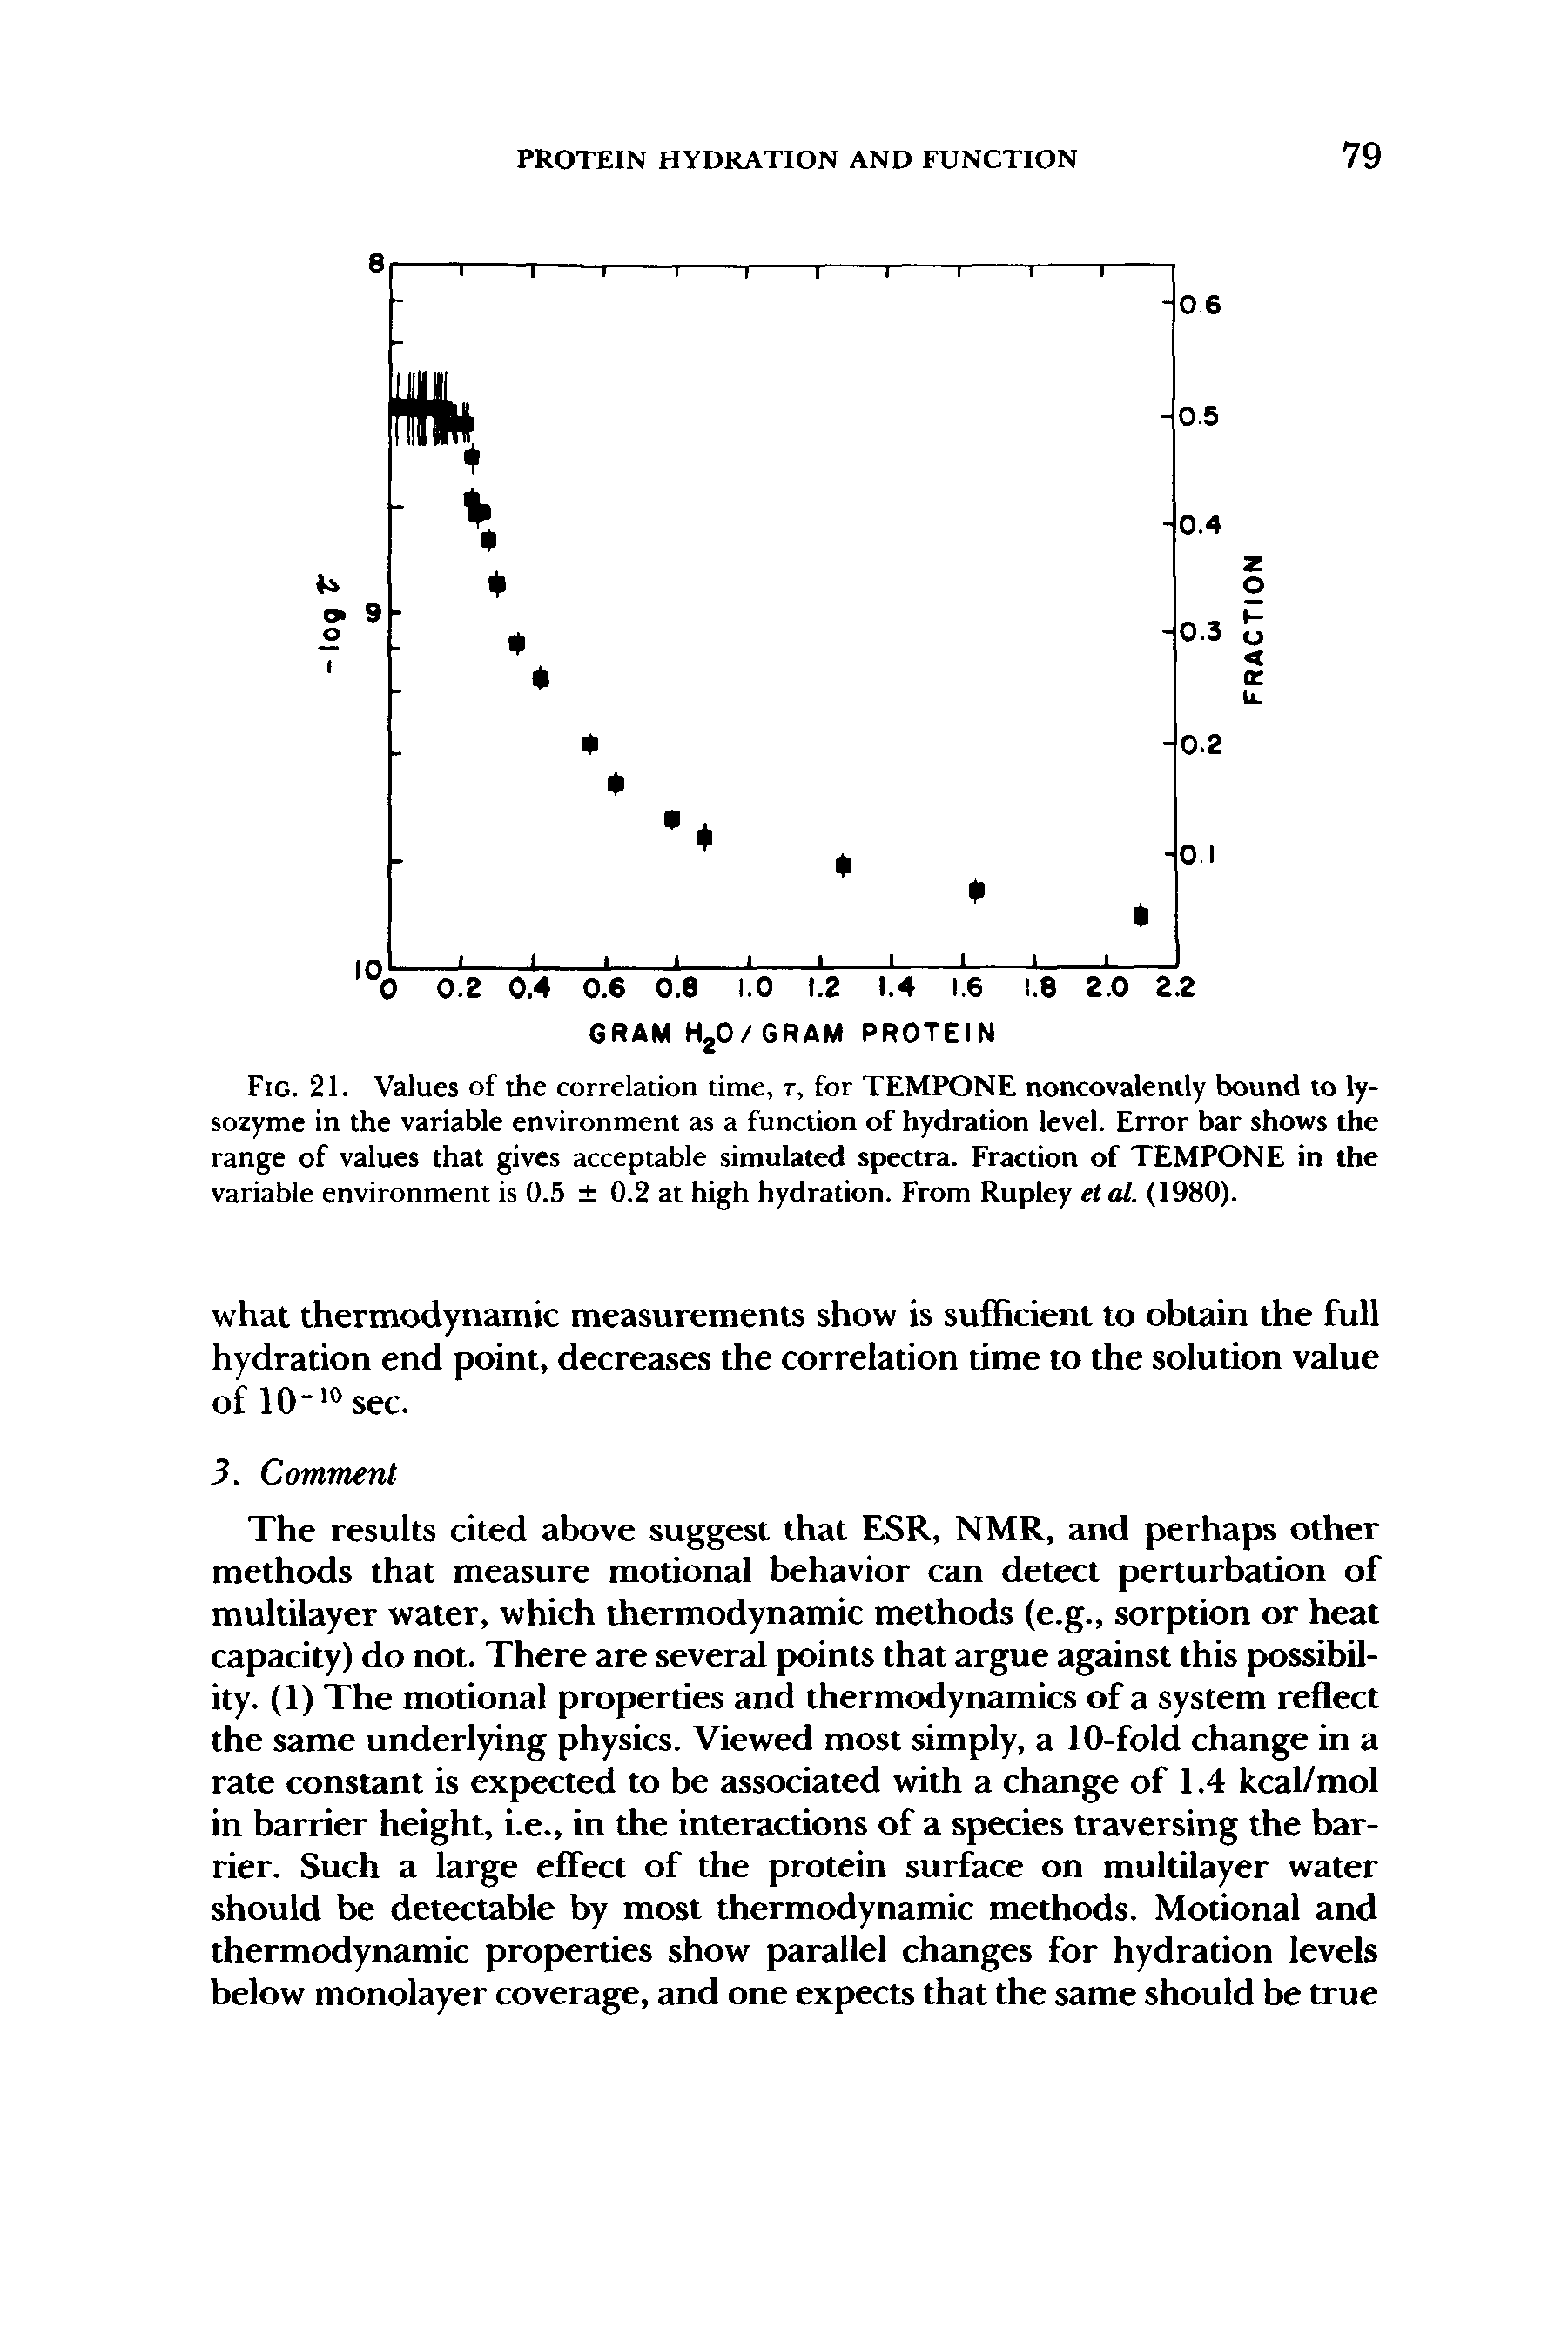 Fig. 21. Values of the correlation time, r, for TEMPONE noncovalently bound to lysozyme in the variable environment as a function of hydration level. Error bar shows the range of values that gives acceptable simulated spectra. Fraction of TEMPONE in the variable environment is 0.5 0.2 at high hydration. From Rupley etal. (1980).